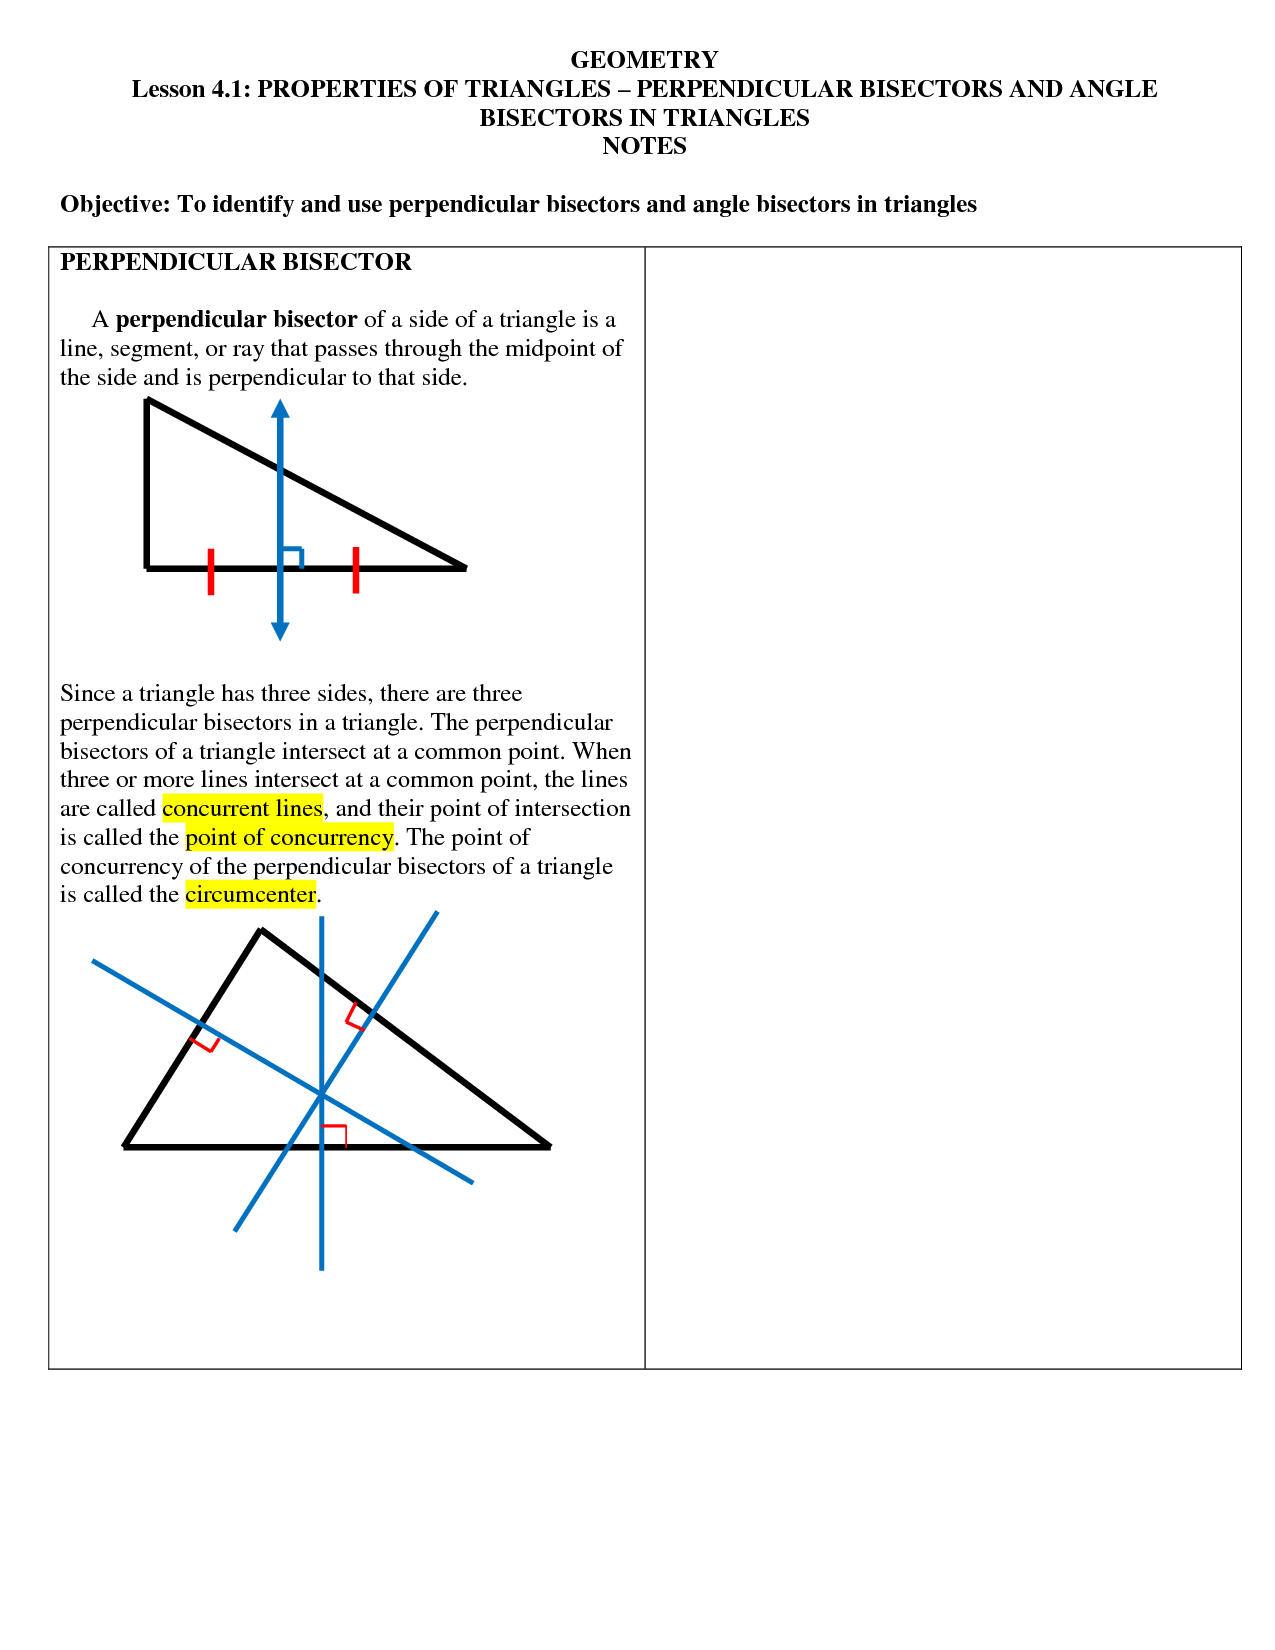 Geometry Perpendicular Angle Bisector Triangle Image